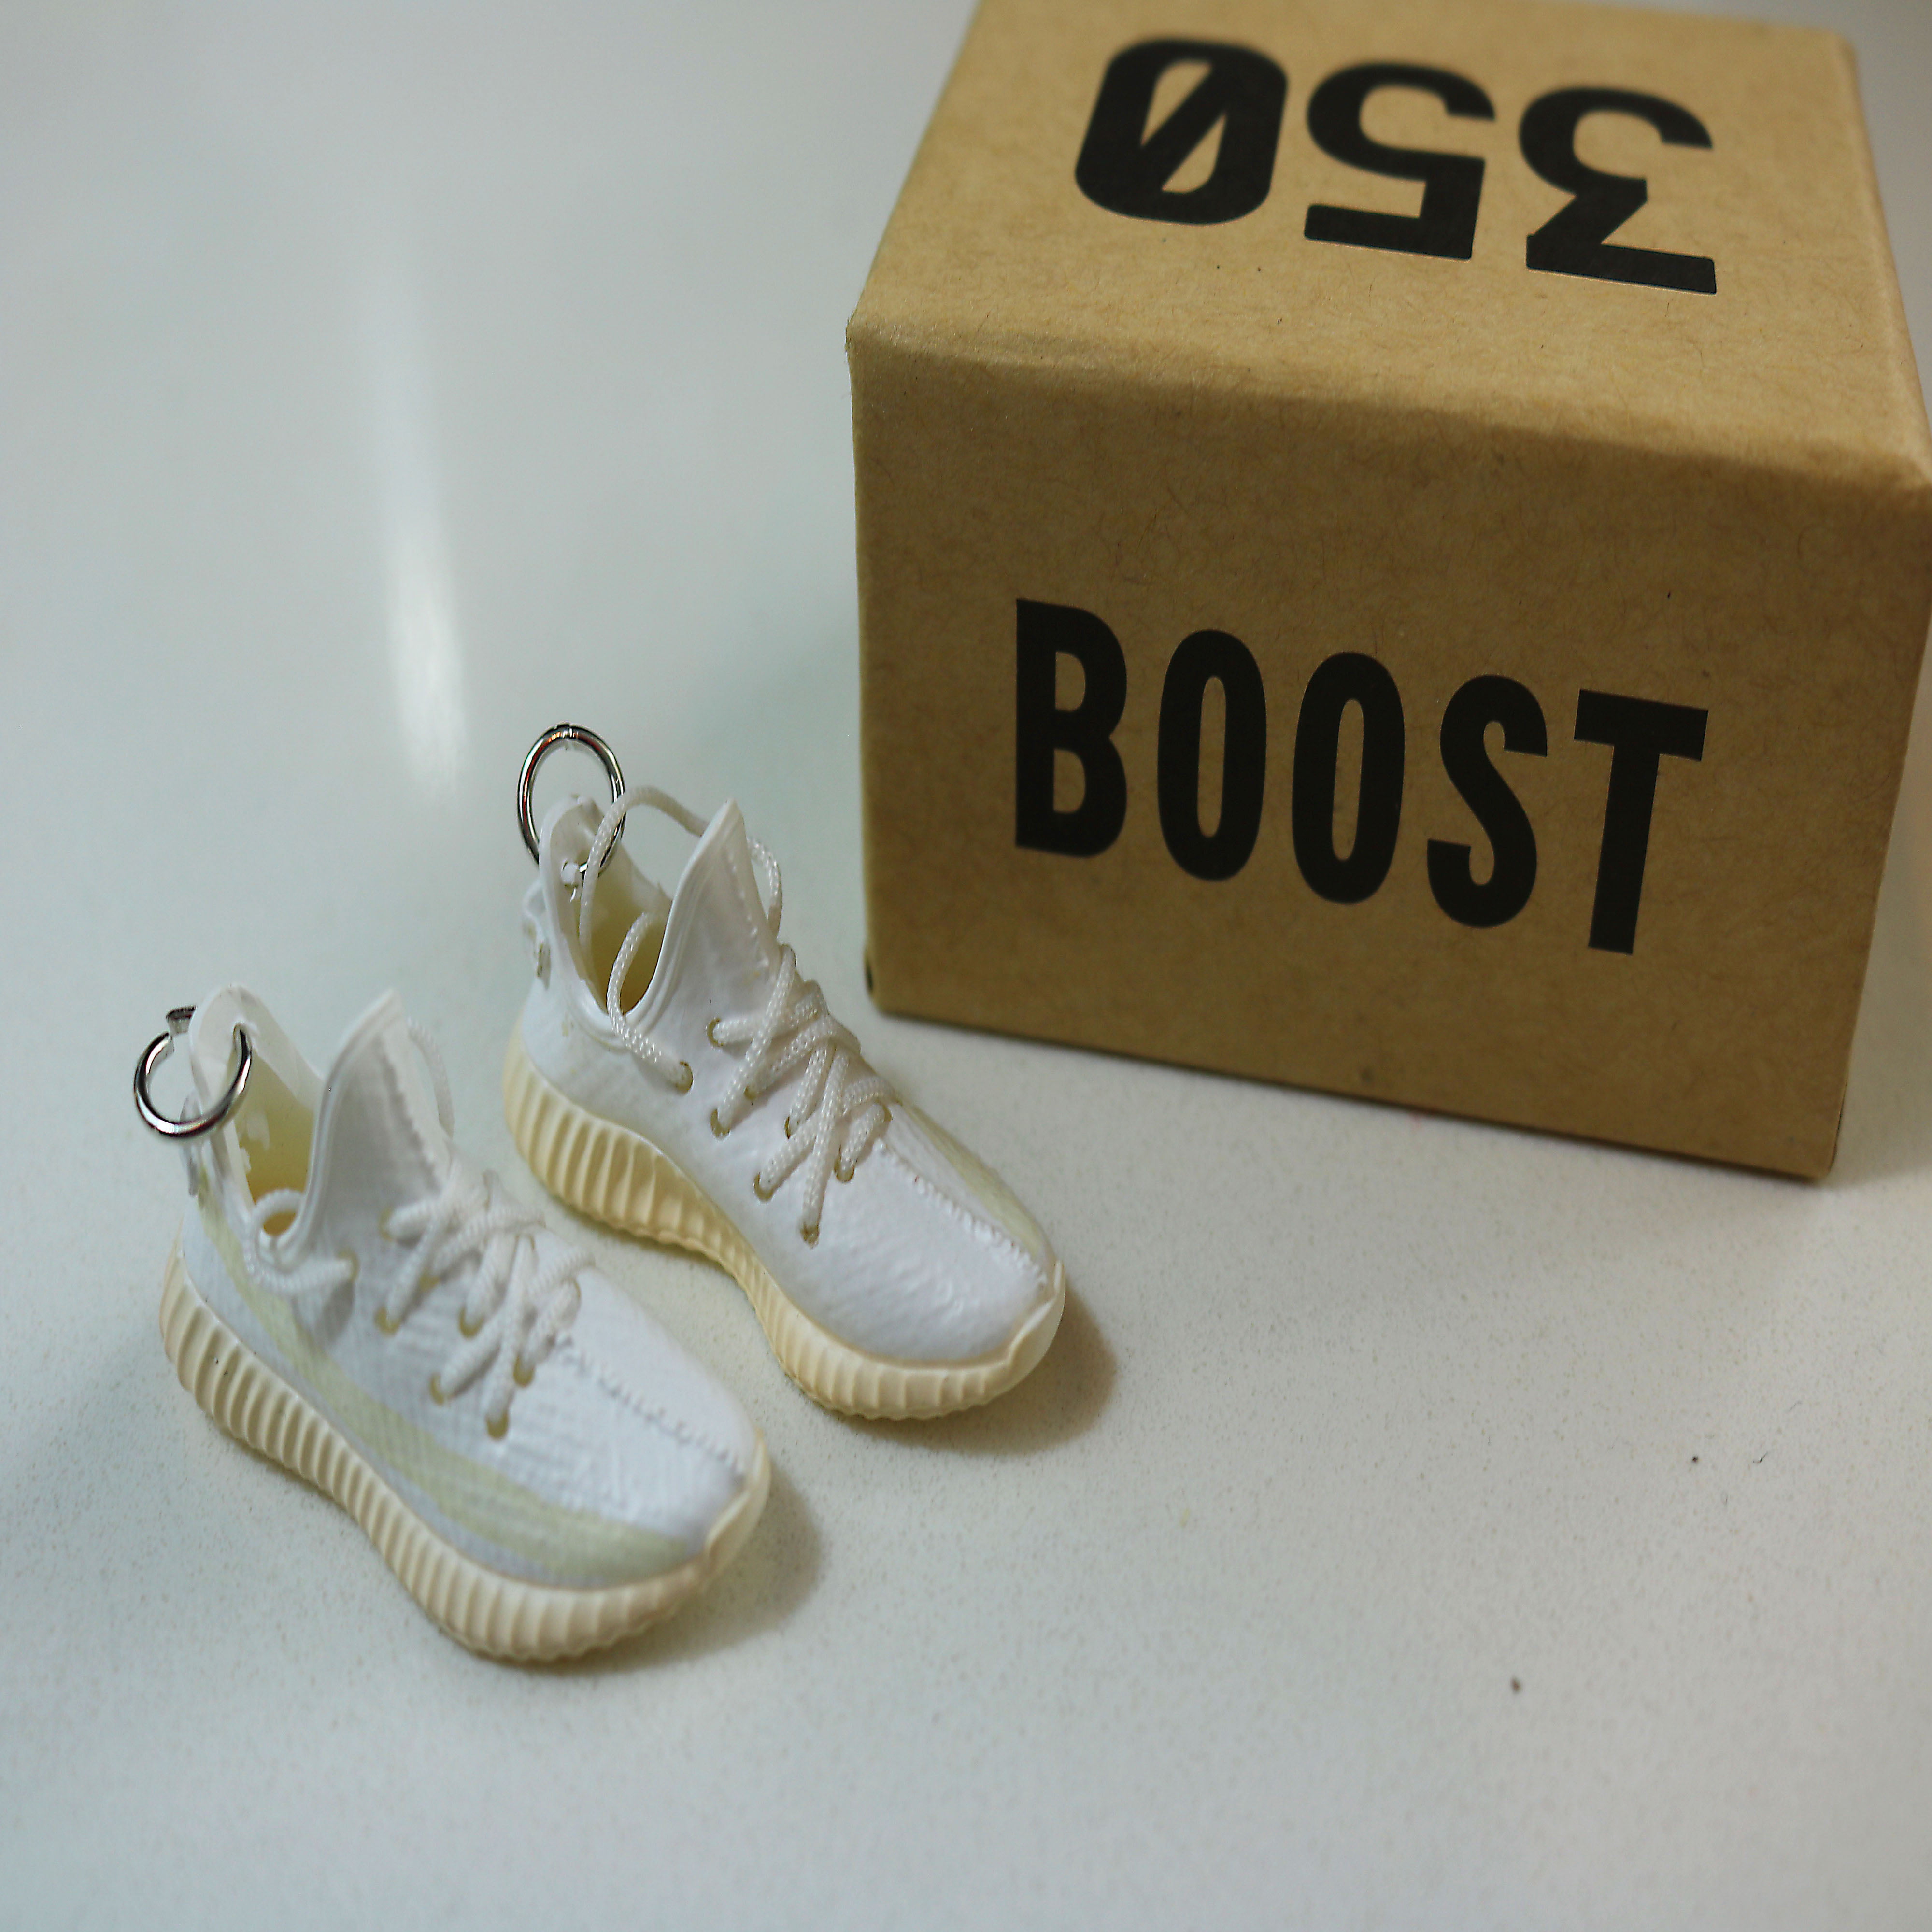 New Mini ~~YEEZY ~ SHOEBOX ~~ for collectible sneaker keychain BOOST 350 